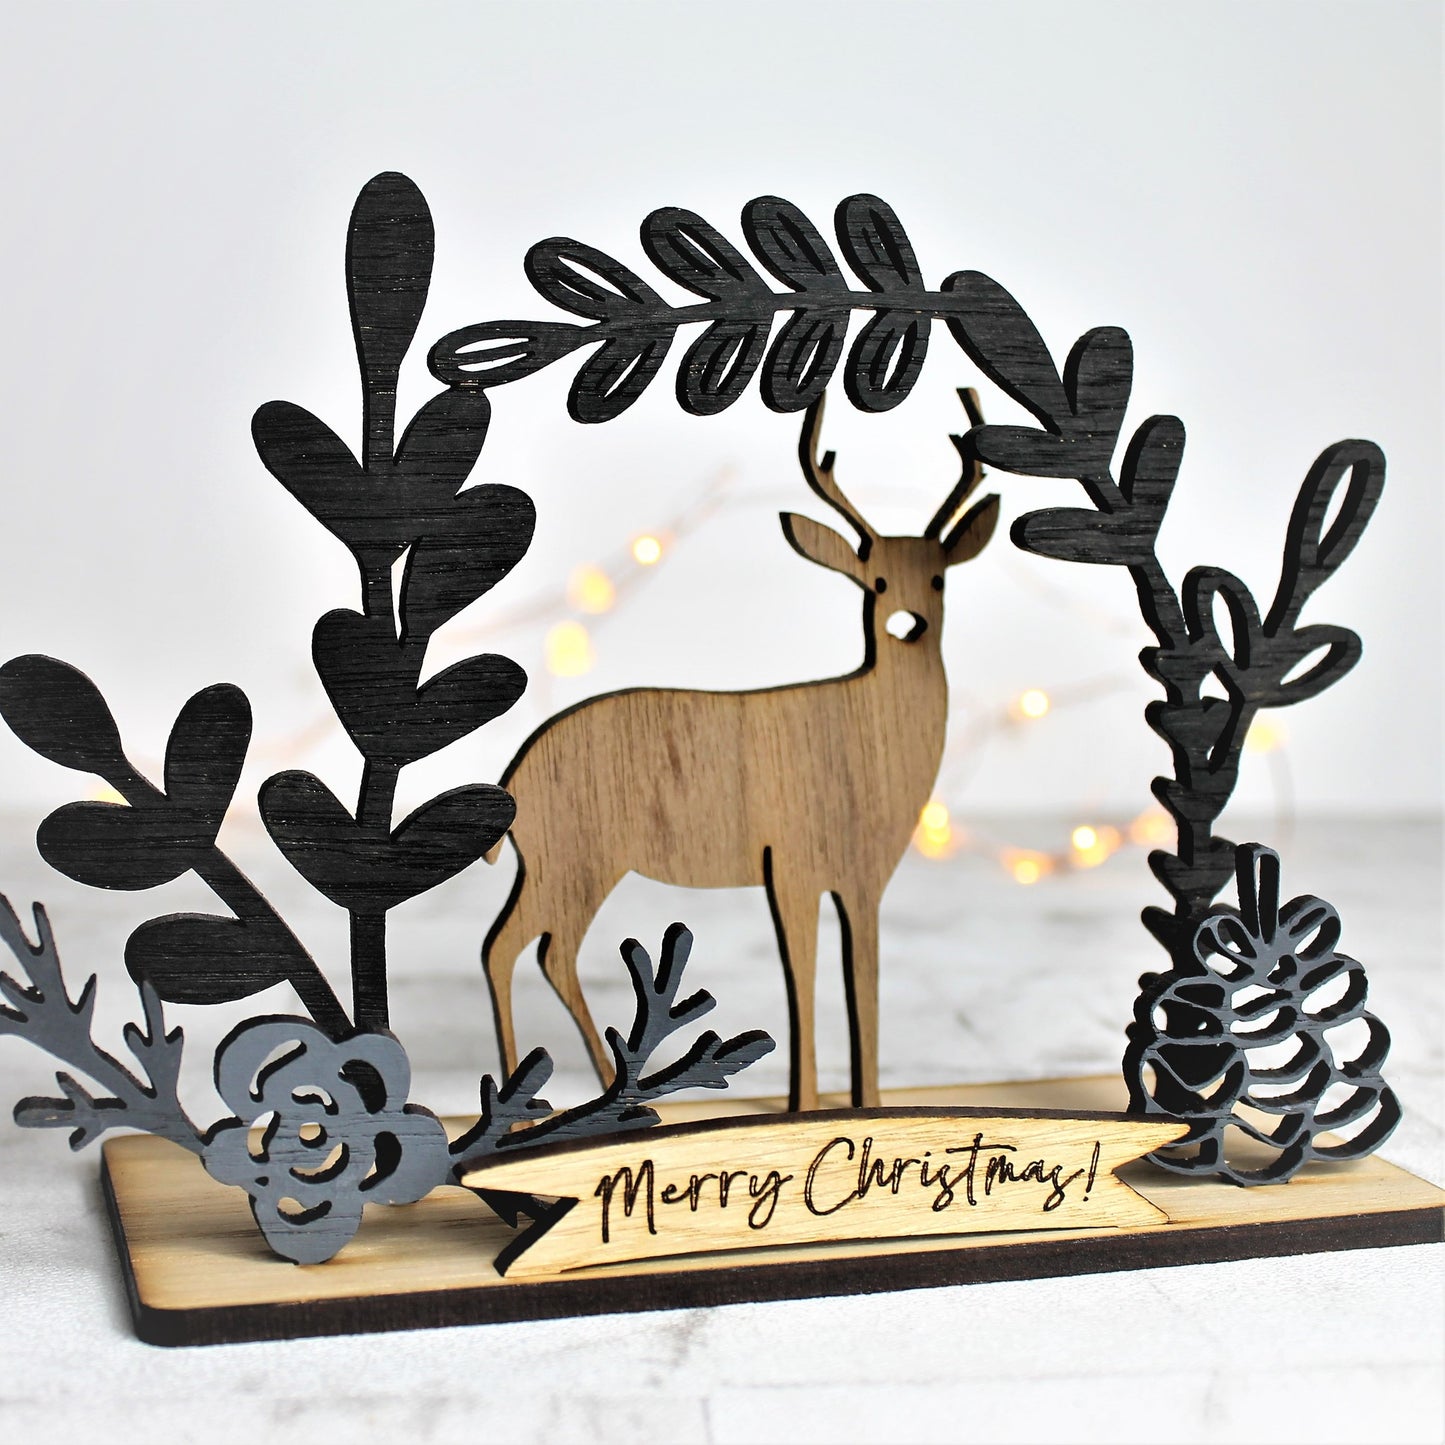 Woodland winter scene with deer silhouette and botanical leaves adorning the edges